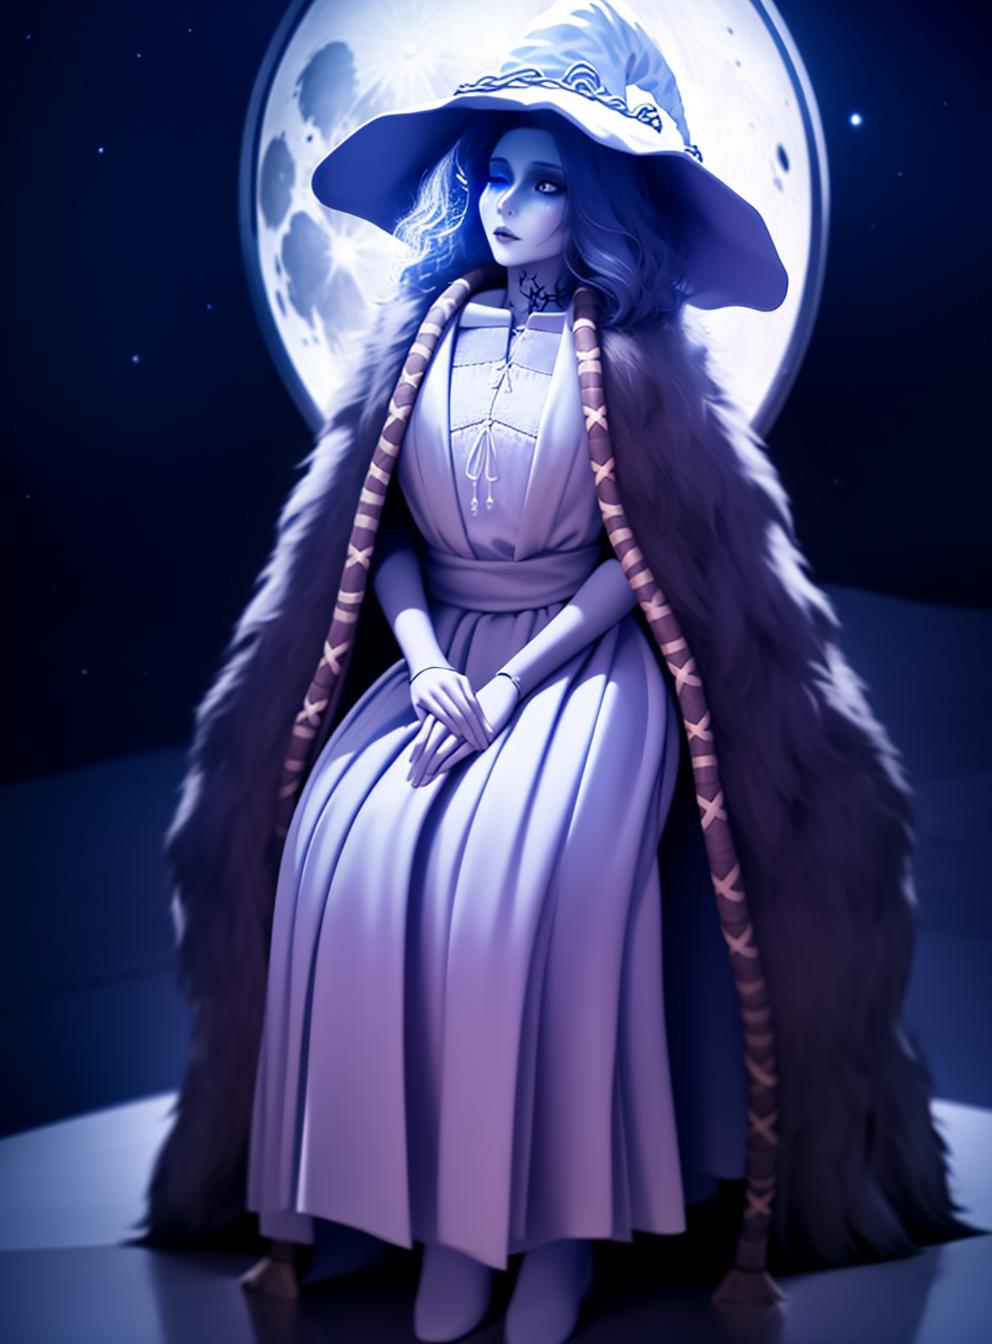 Elden Ring Ranni The Witch image by binnng